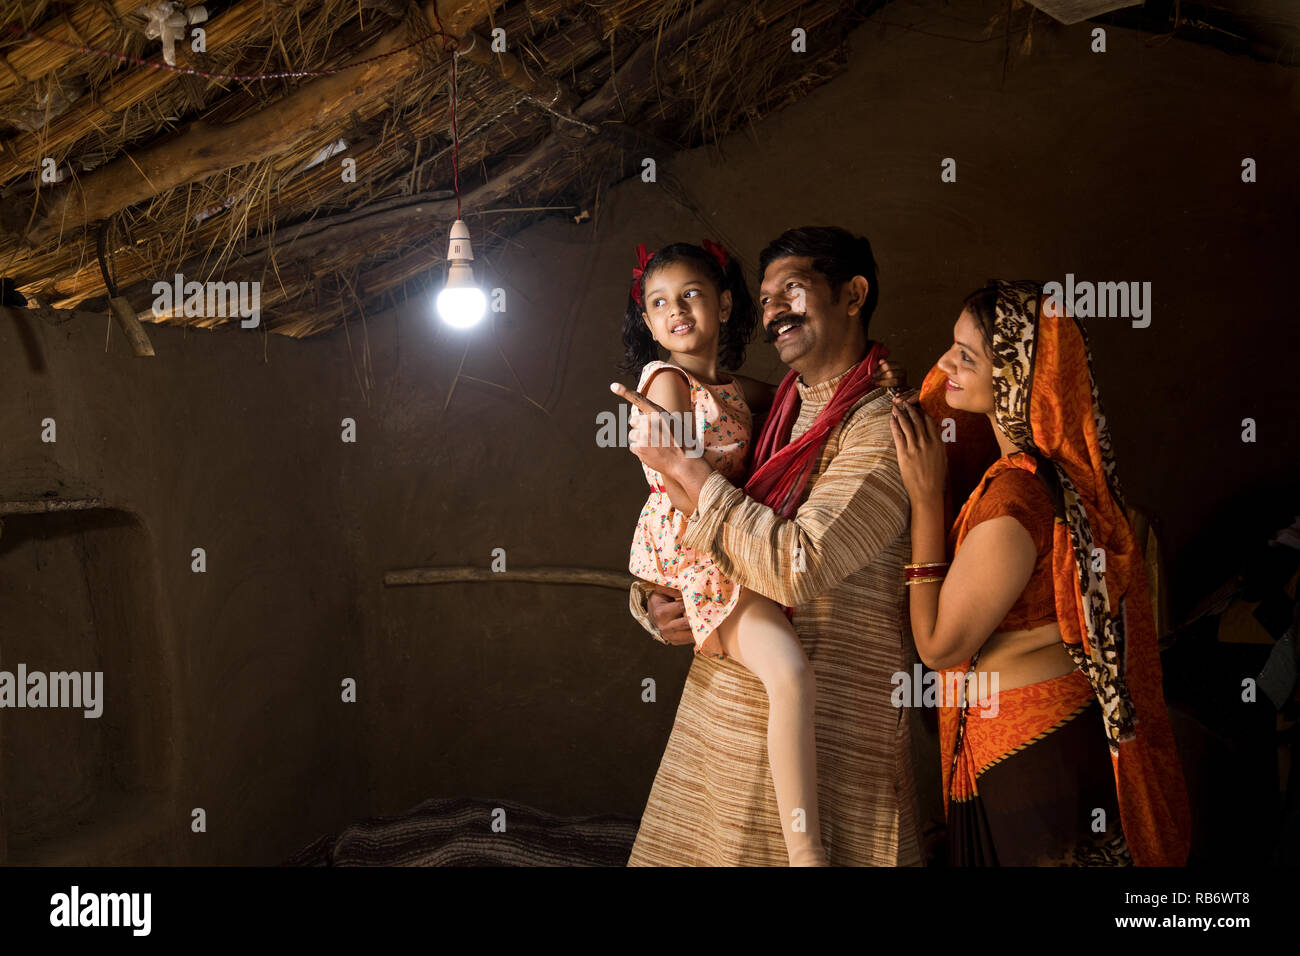 Rural Indian family delighted at the glow of light bulb and electricity reaching their home after long wait Stock Photo